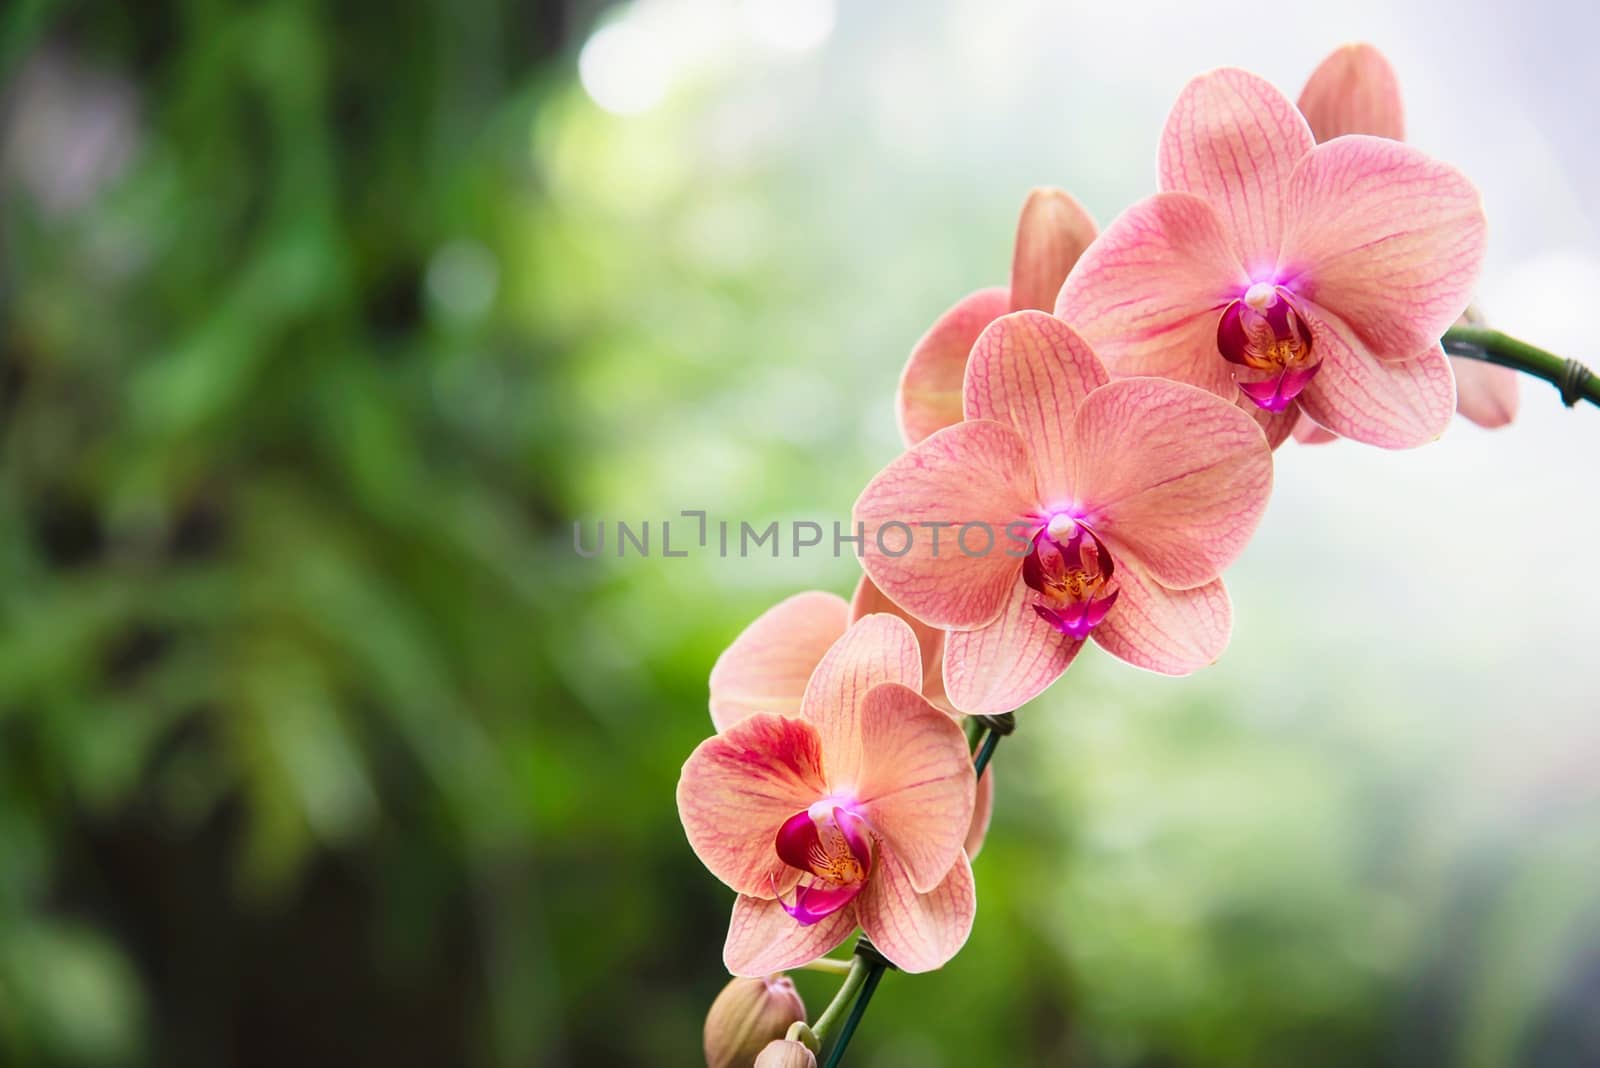 Light orange orchid with green leaf background - beautiful nature flower blossom concept by pairhandmade